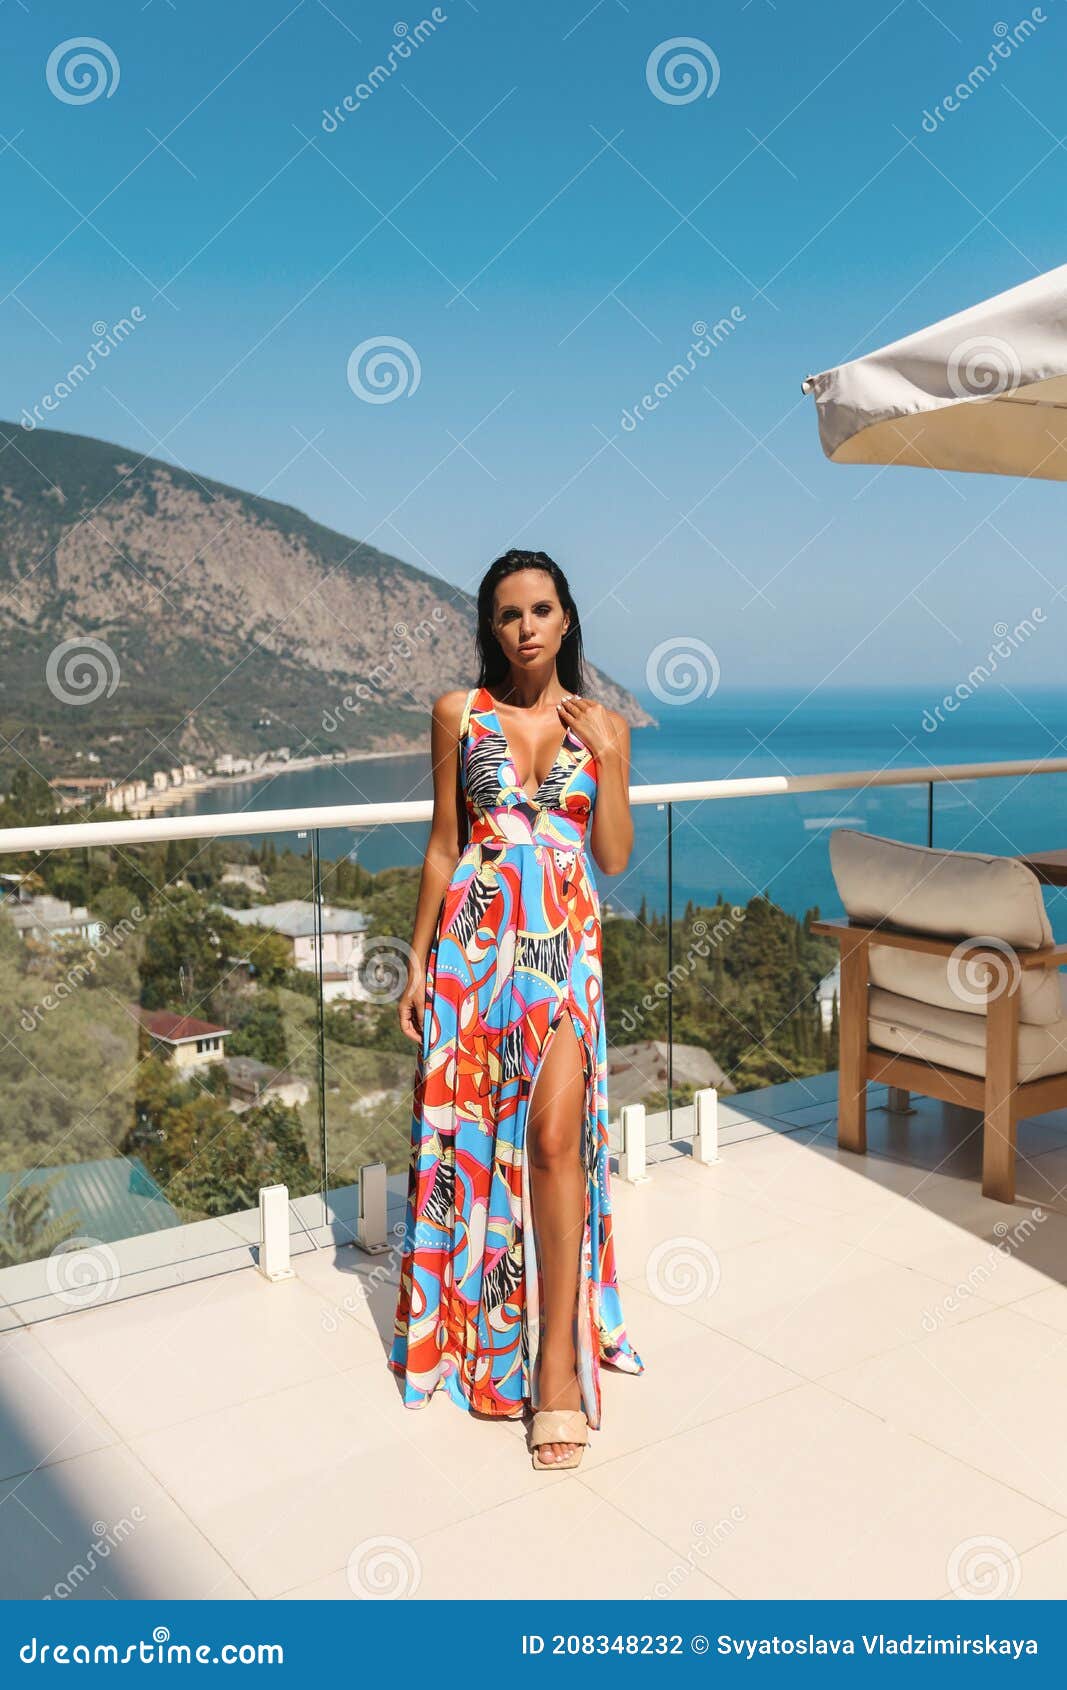 Woman With Dark Hair In Elegant Dress Posing At The Balcony With Sea View Stock Photo Image Of